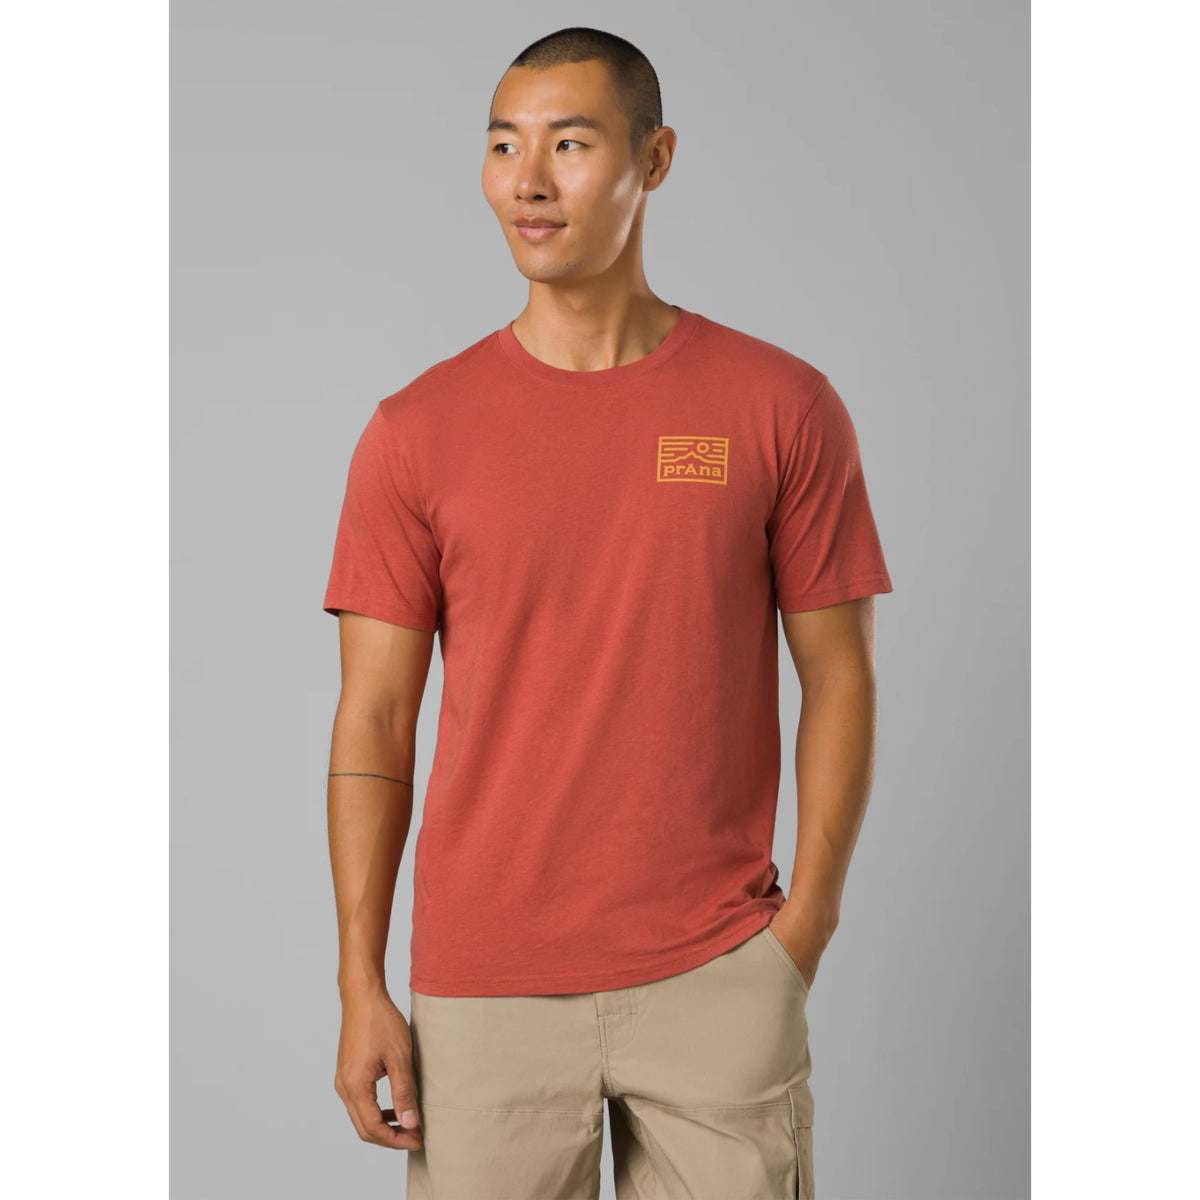 Prana Graphic Short Sleeve T-Shirt in rust heather colour